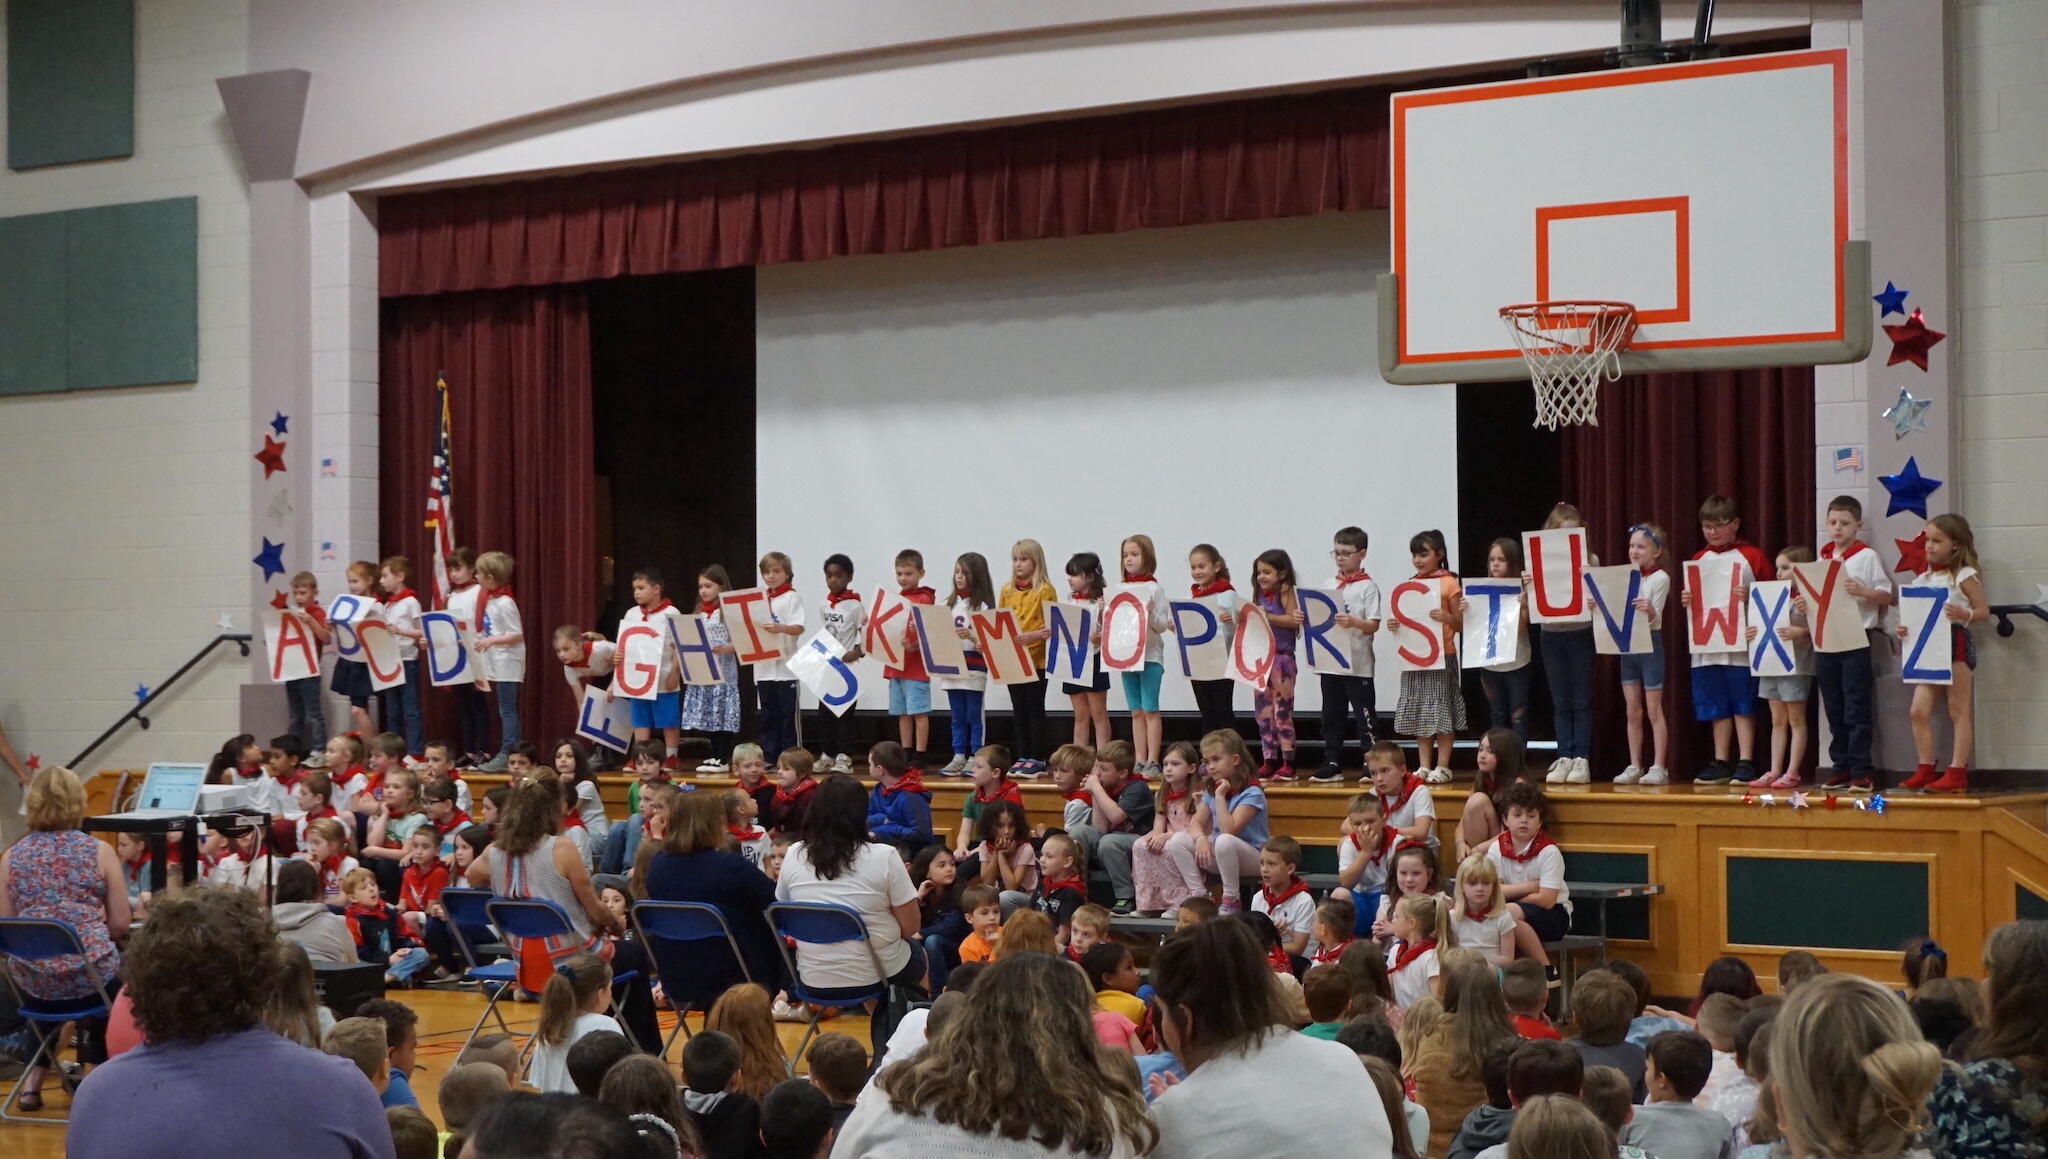 Students lined up across a school stage holding posters with letters of the alphabet.